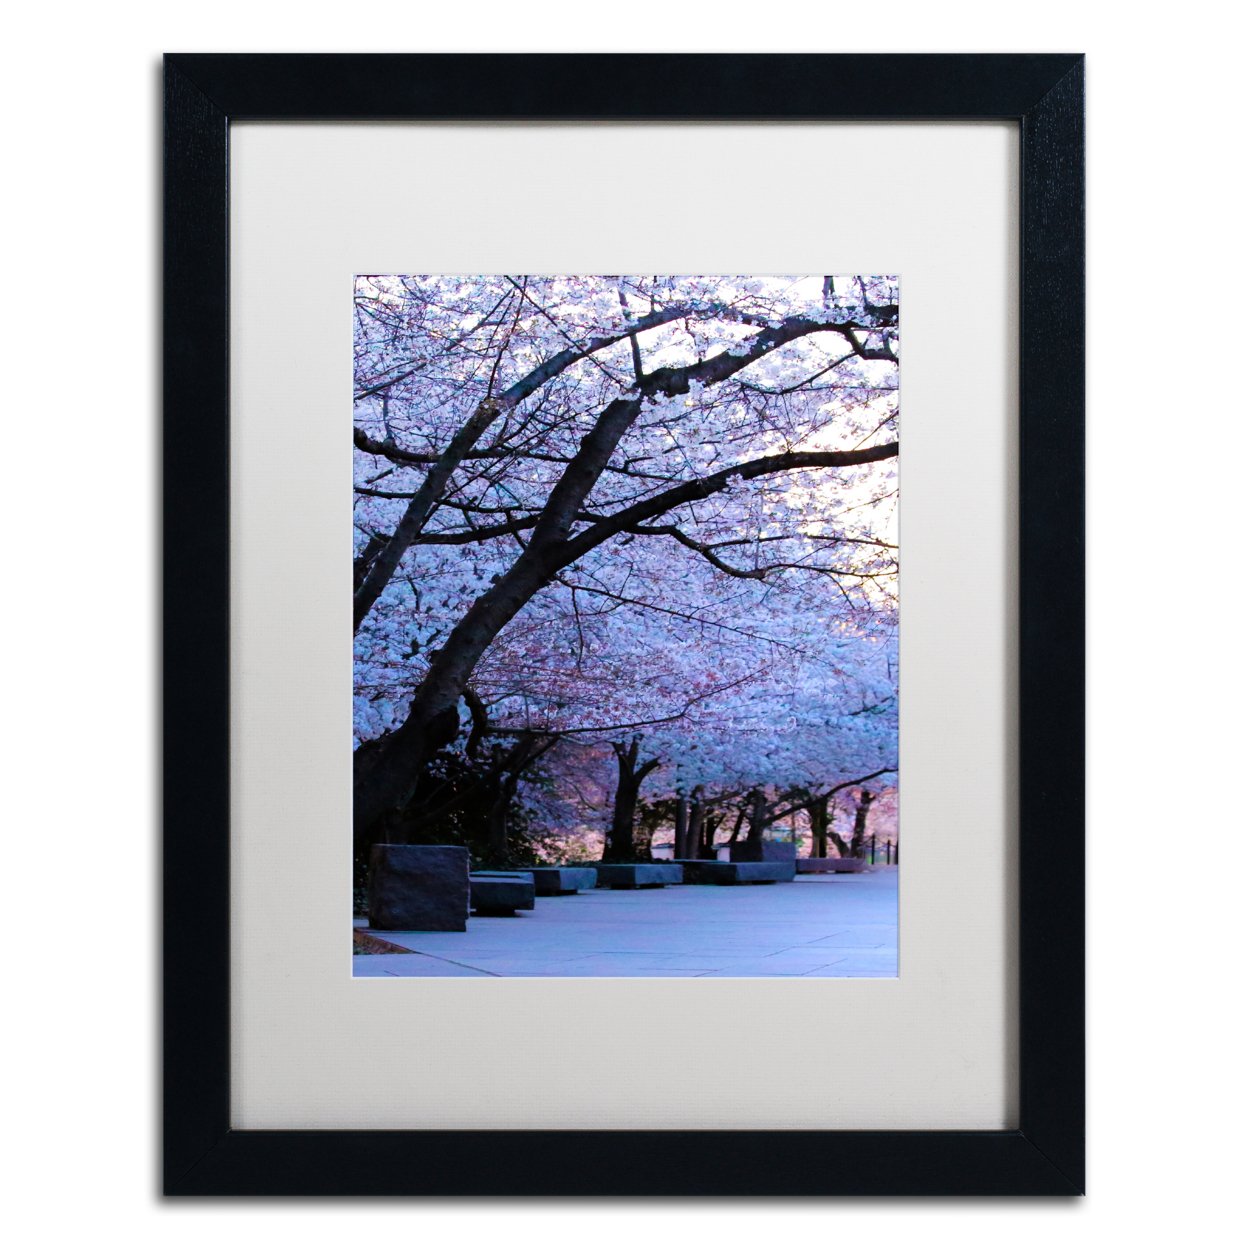 CATeyes 'Cherry Blossom Shade' Black Wooden Framed Art 18 X 22 Inches